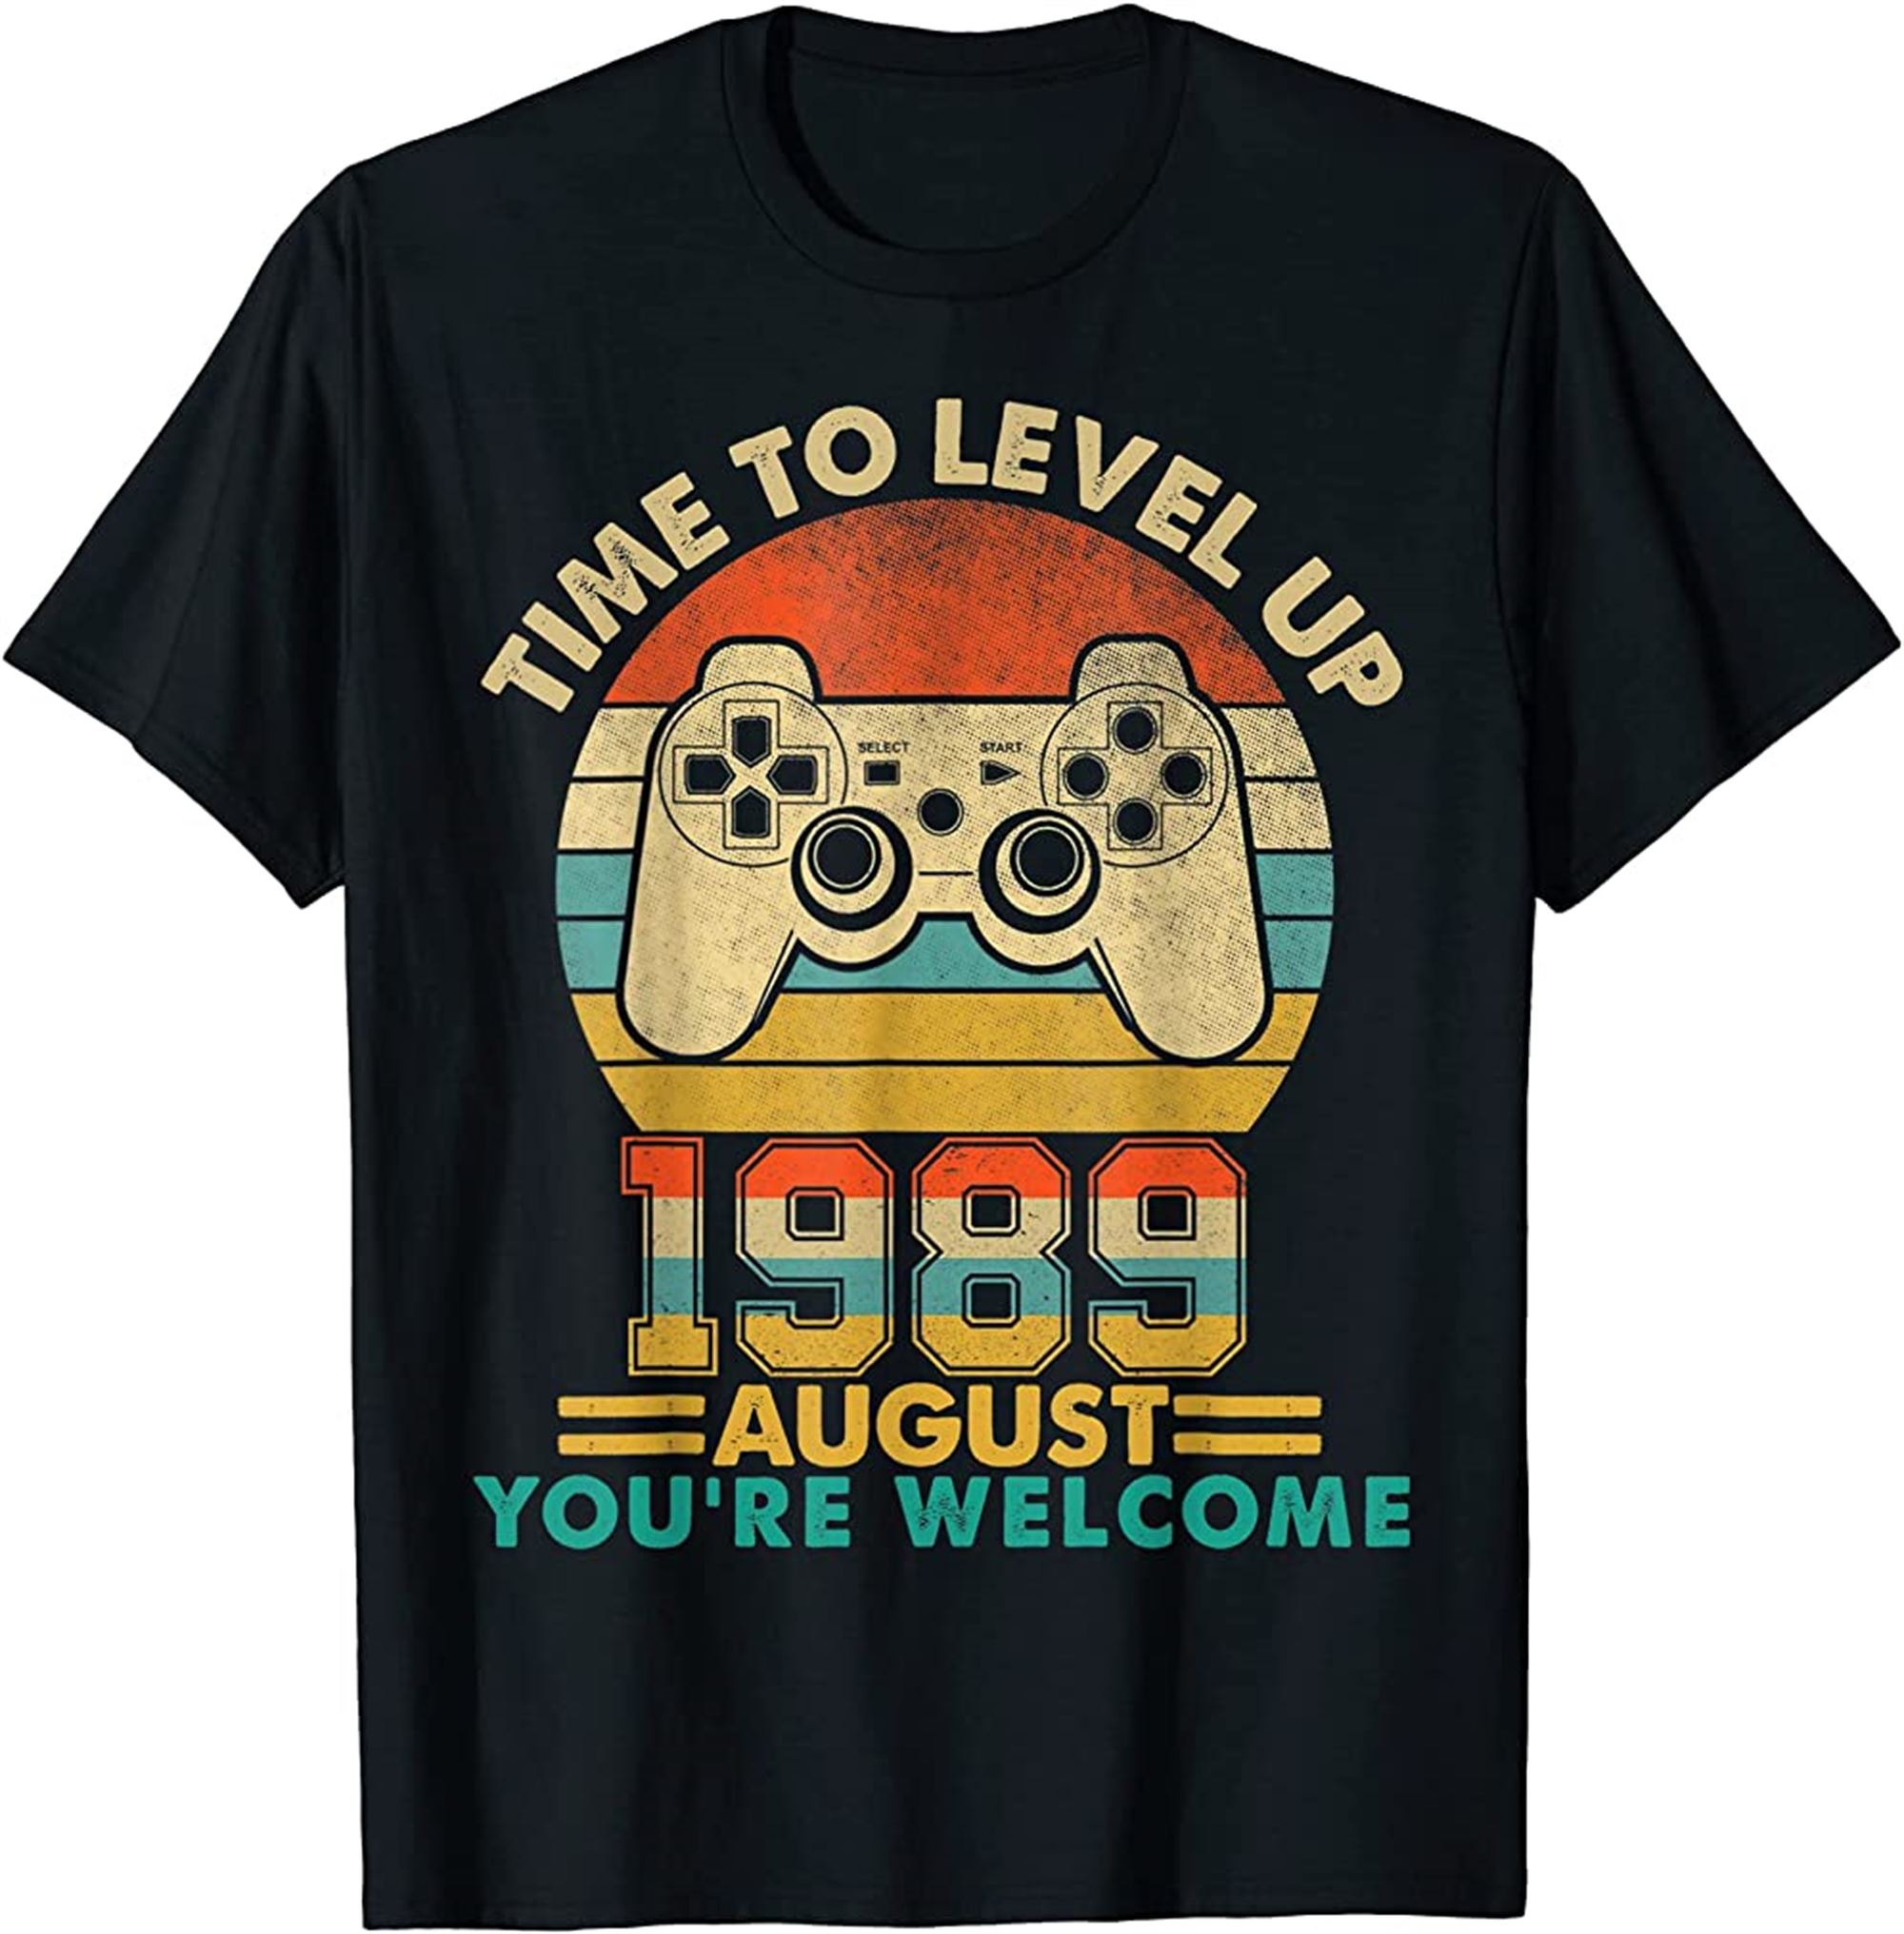 Vintage 1989 August 33 Years Old Video Gamer 33th Birthday T-shirt Full Size Up To 5xl